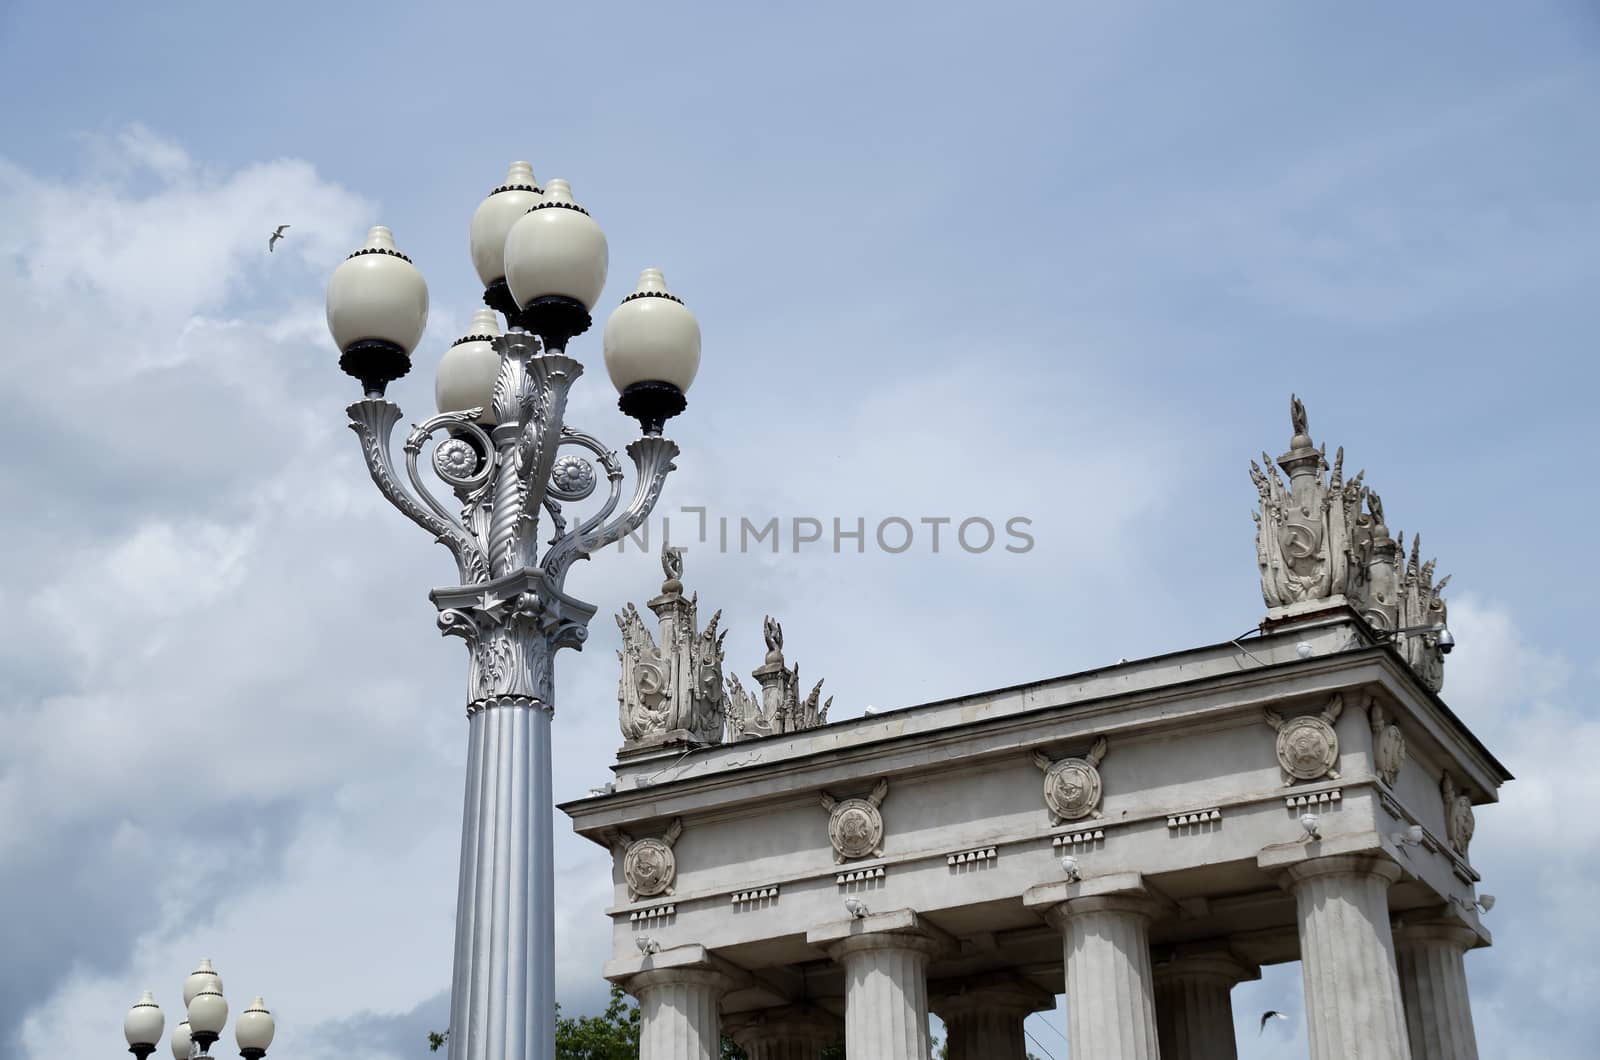 Rotunda and lamps on the embankment of the city by Vadimdem